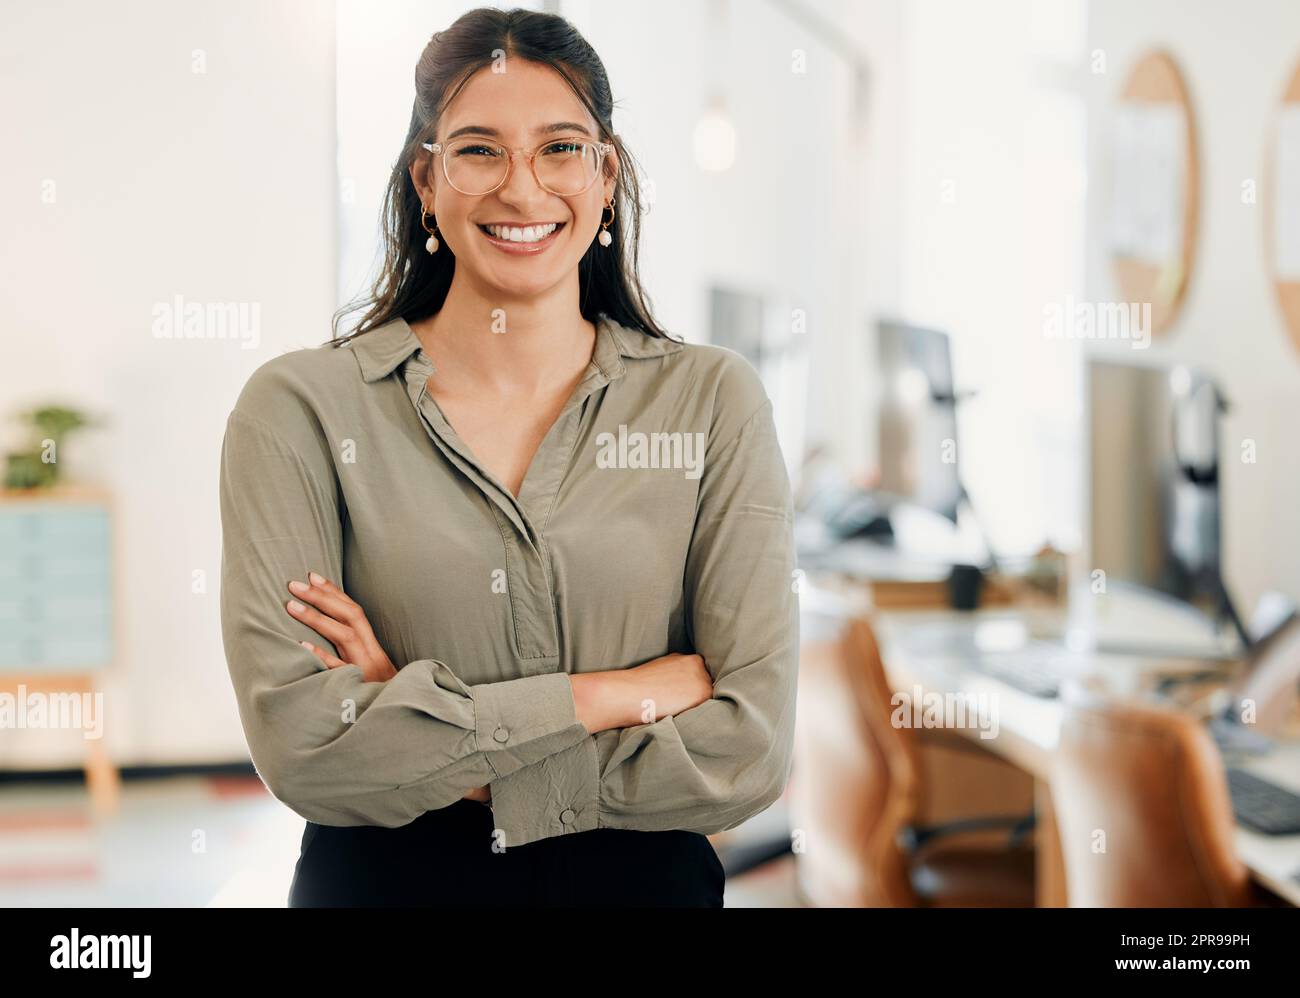 Im more confident in my workplace. an attractive young businesswoman standing alone in the office with her arms folded. Stock Photo